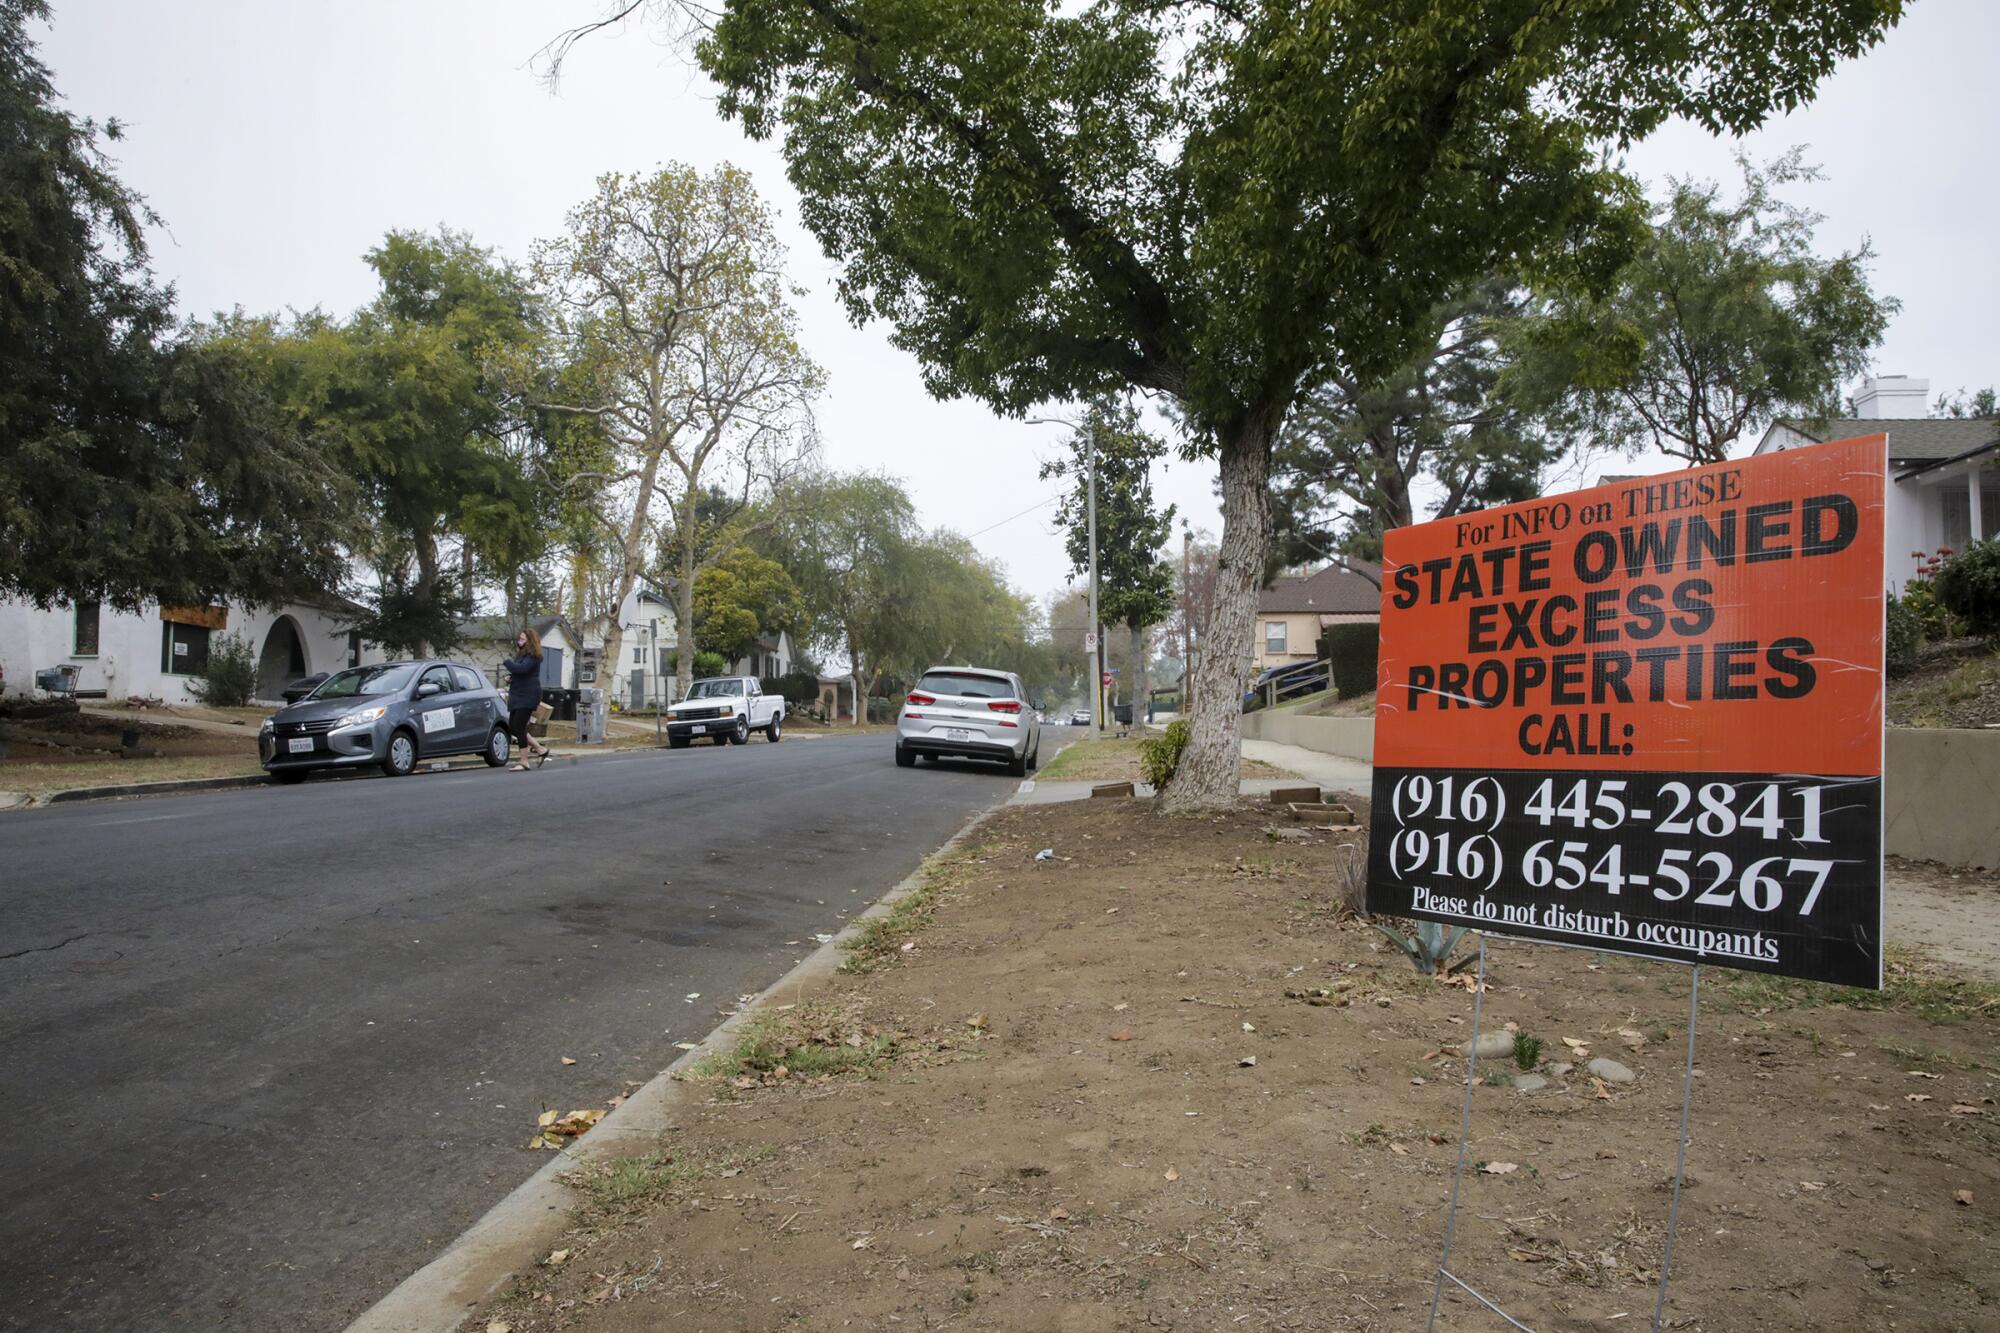 A sign advertising "state owned excess properties" is seen in front of a home on Sheffield Avenue in El Sereno.